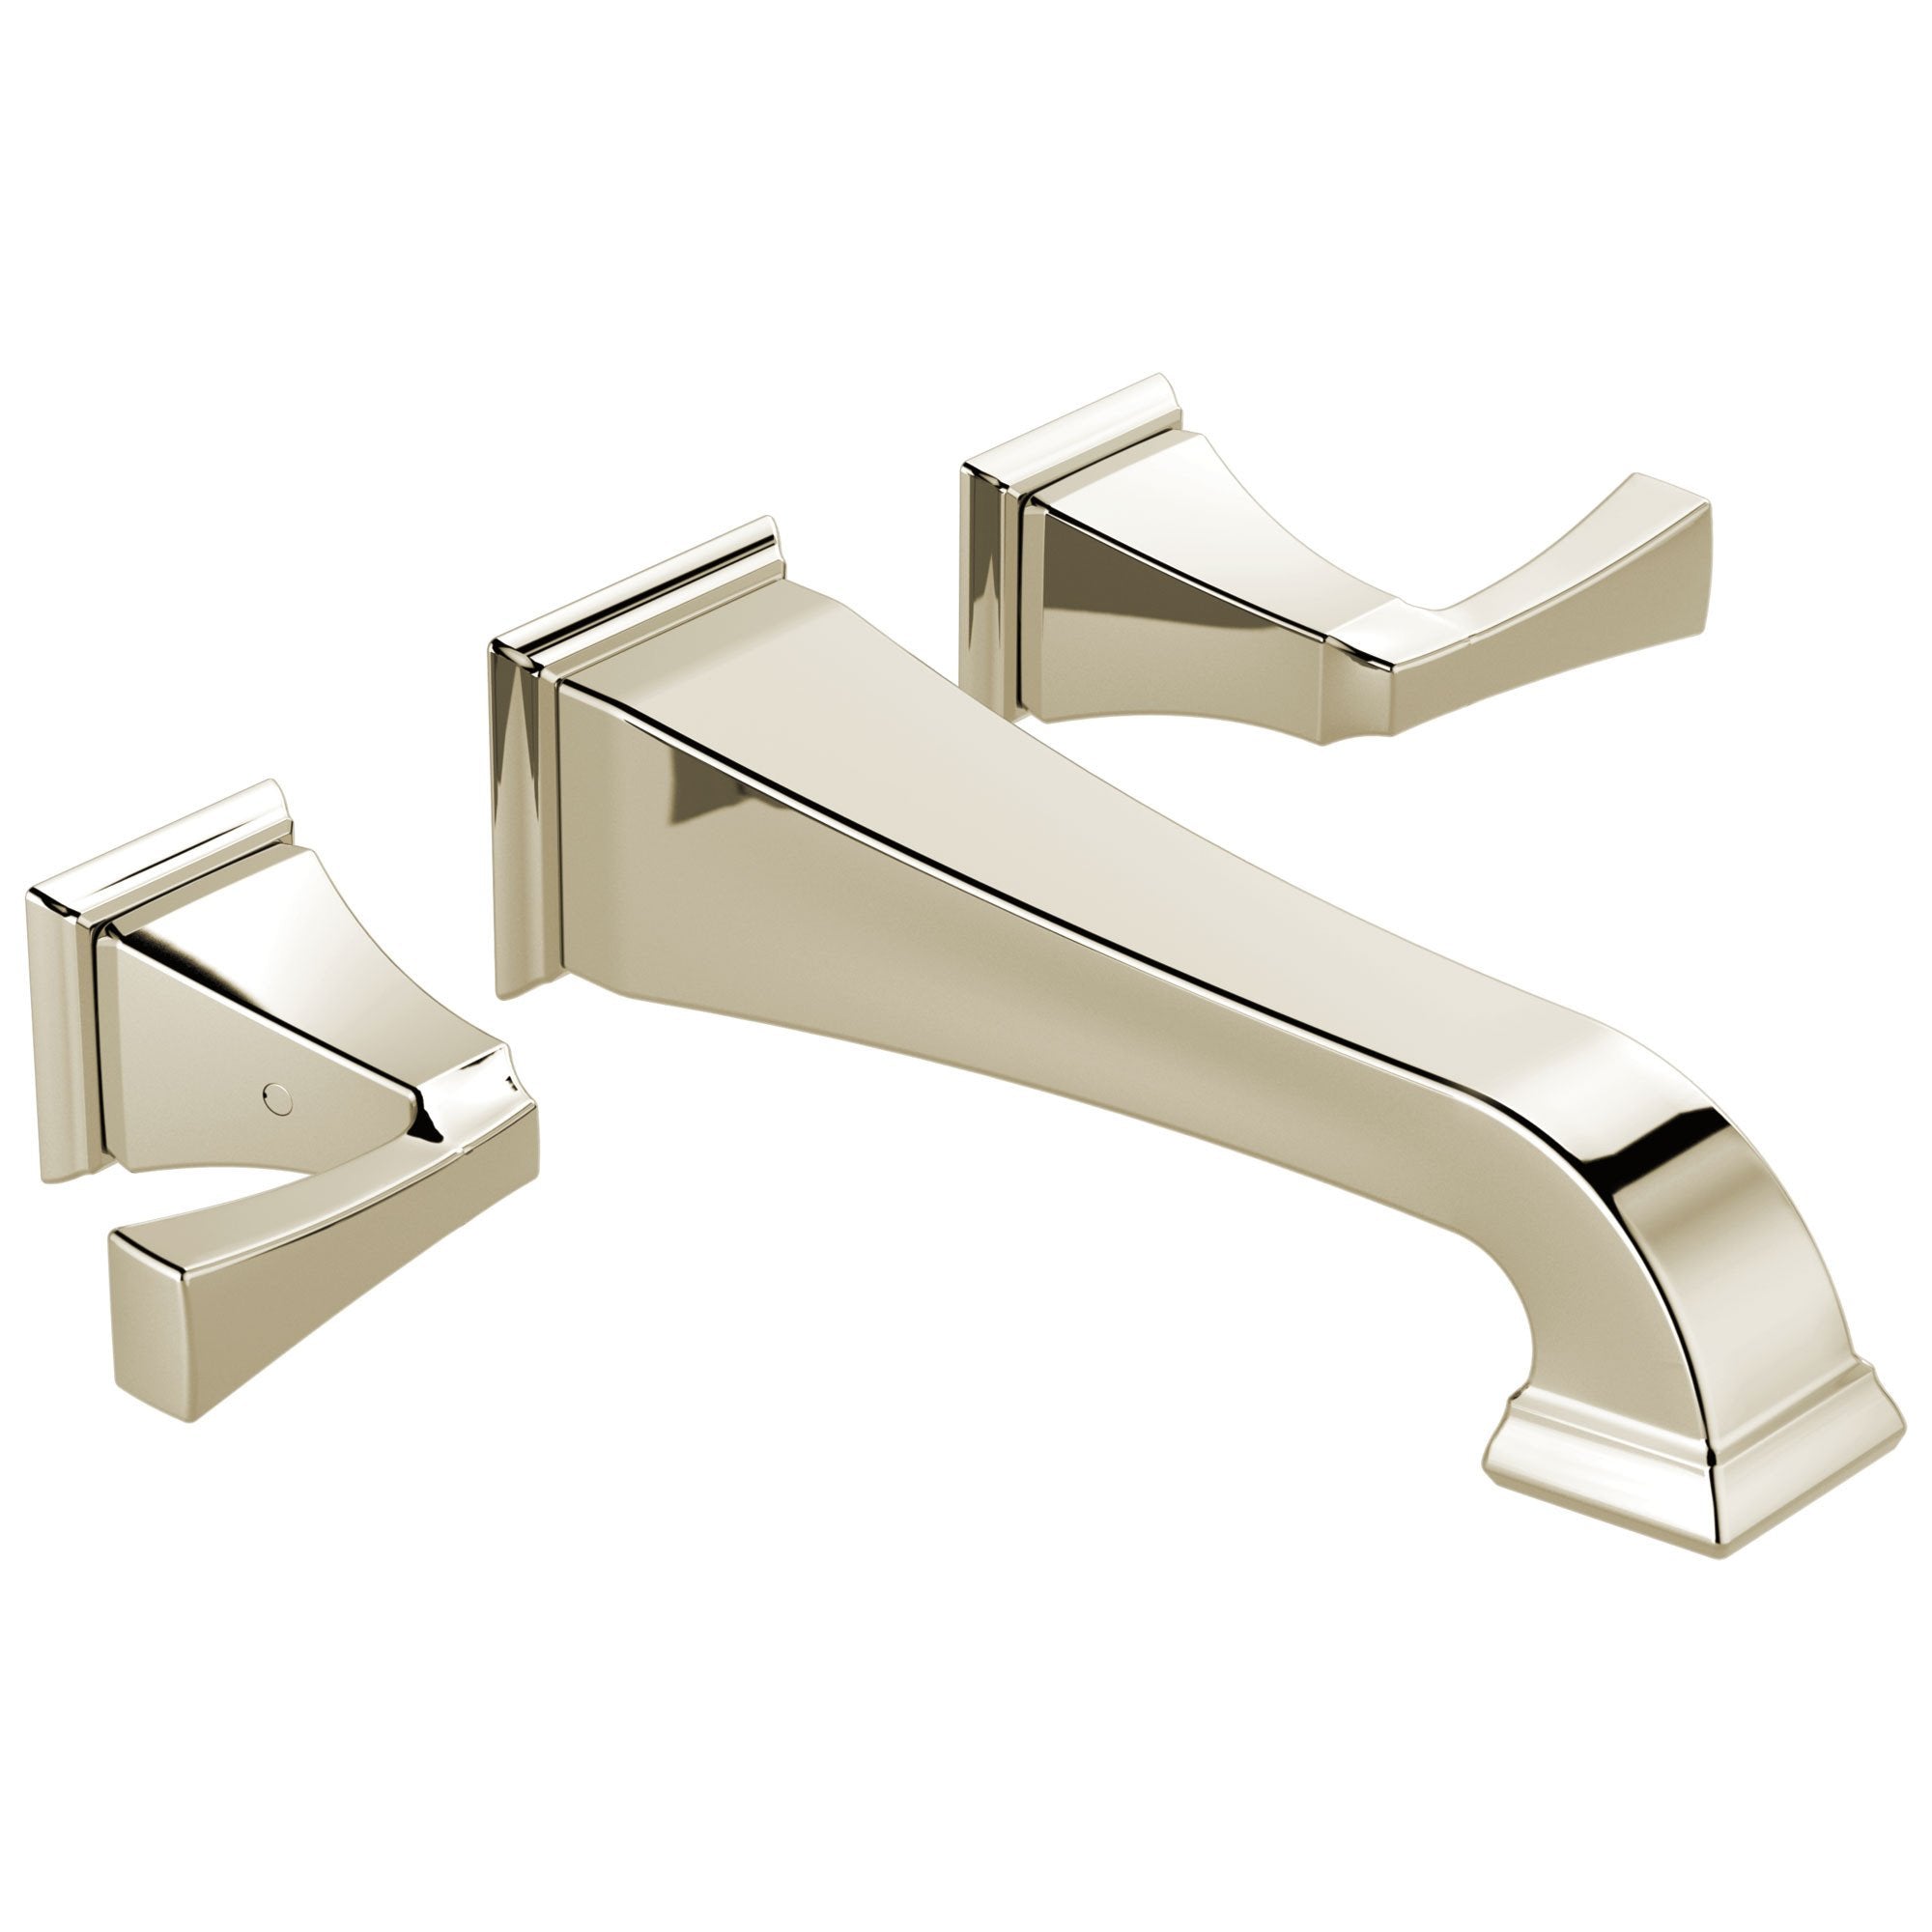 Delta Dryden Collection Polished Nickel Finish Two Handle Wall Mounted Bathroom Sink Lavatory Faucet Trim Kit (Requires Rough-in Valve) DT3551LFPNWL